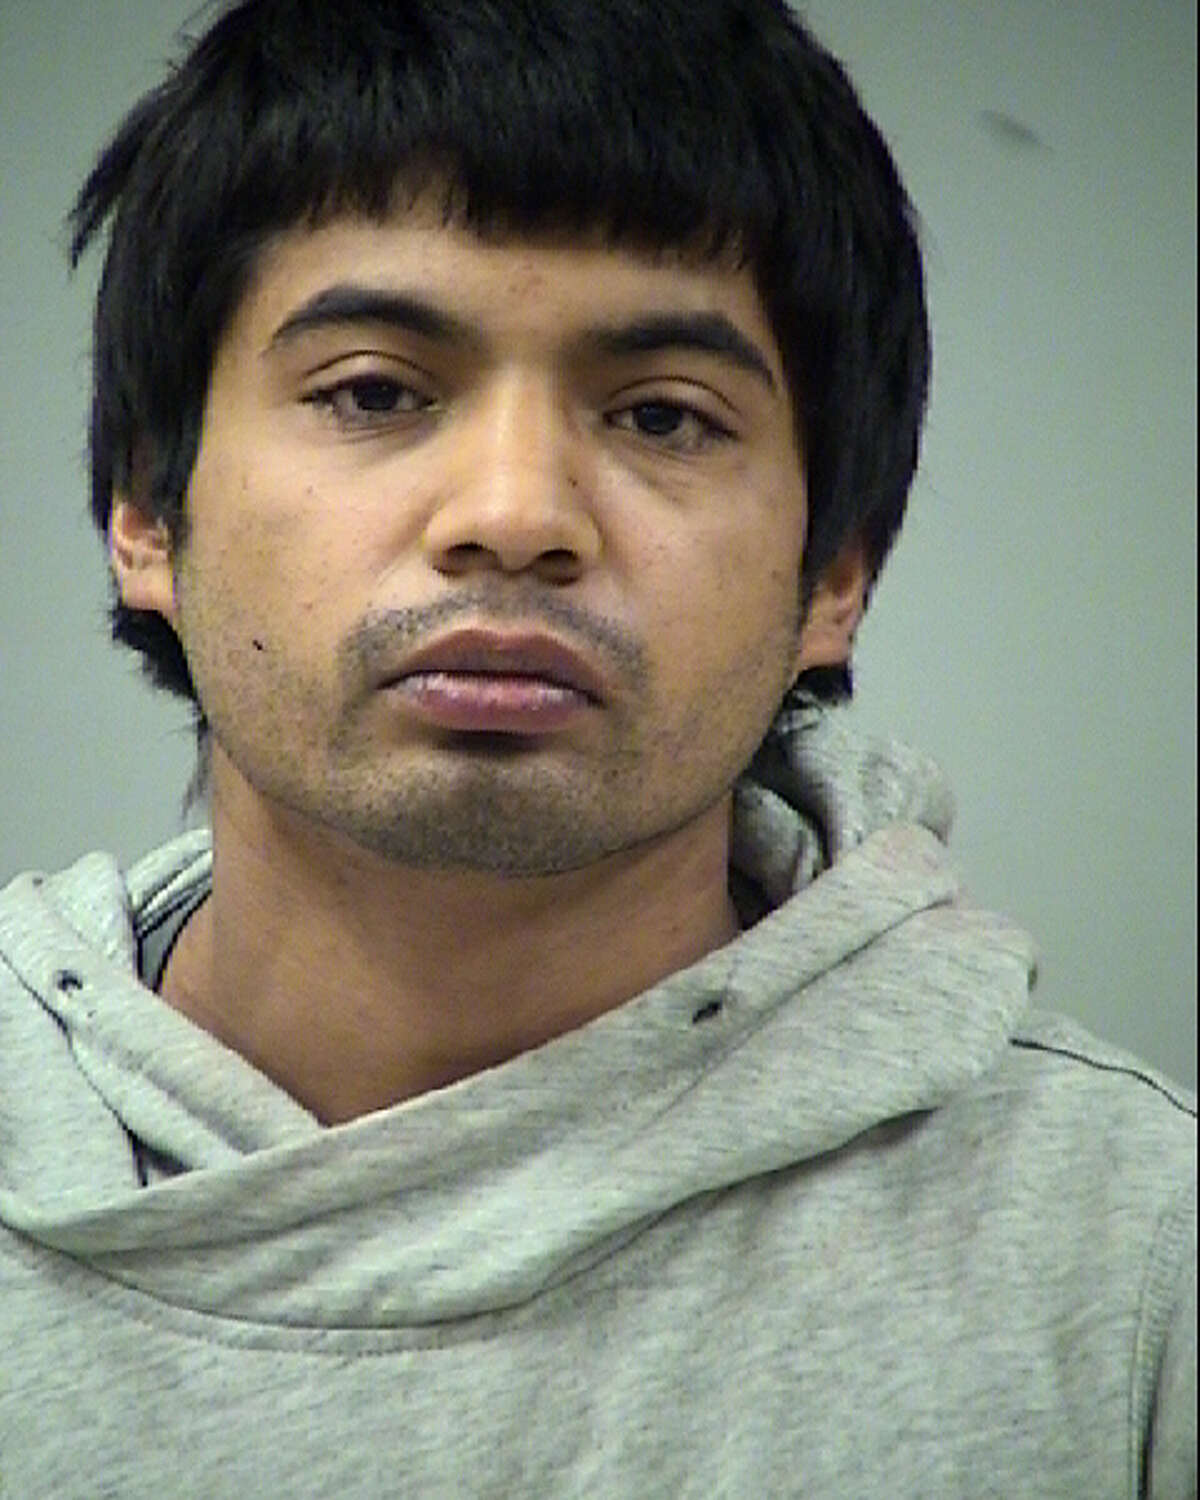 Gabriel Lupio Rodriguez, 19, was charged with a first-degree felony count of aggravated robbery and a Class B misdemeanor for possession of marijuana less than 2 ounces.